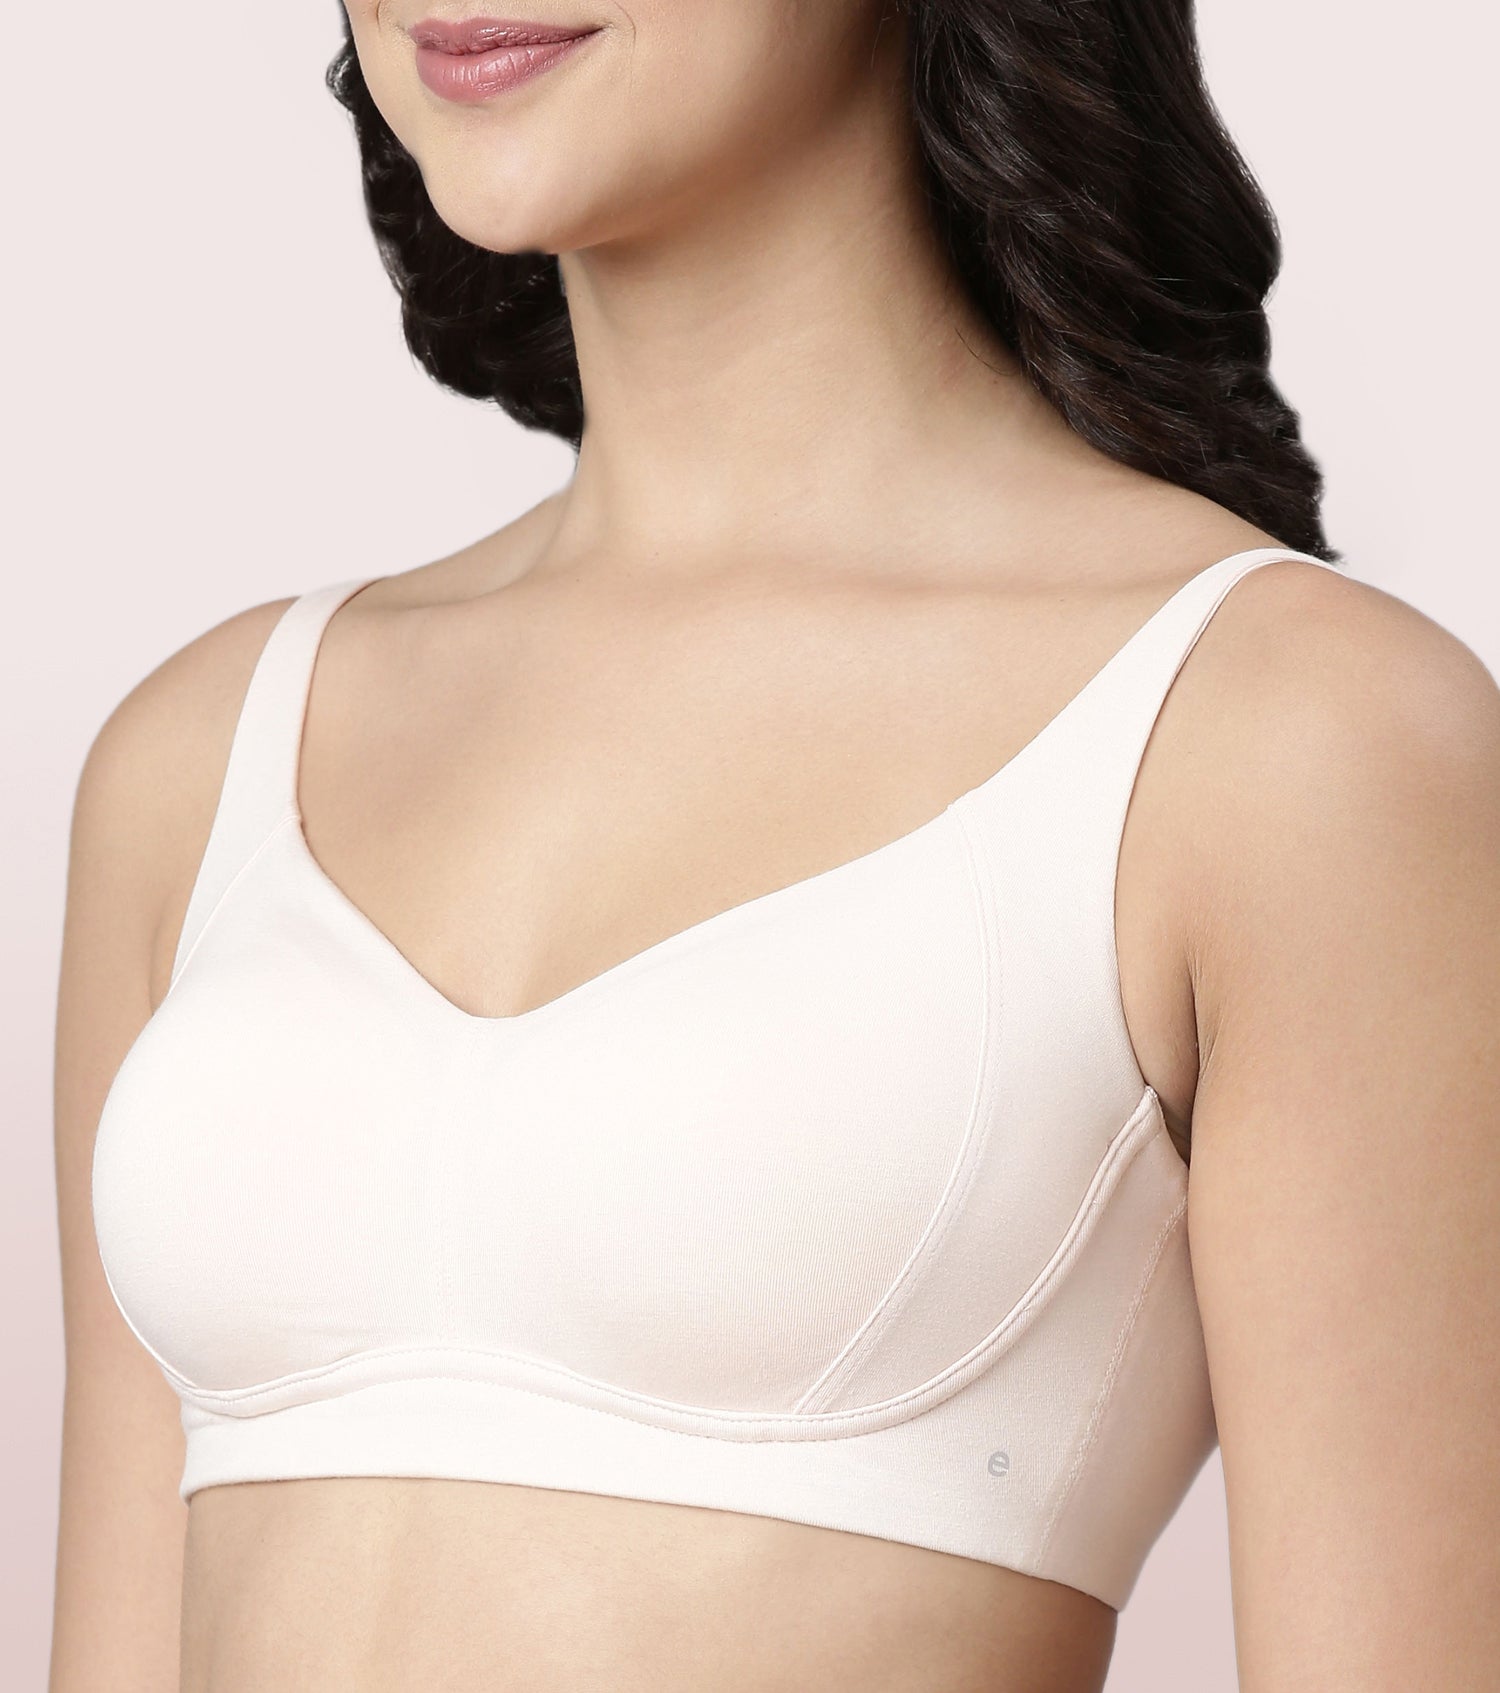 Enamor Innovative Bamboo Fabric Full Support Bra For Women | Eco-Friendly  Bamboo Fabric For All Day Freshness - Eclipse / 32B